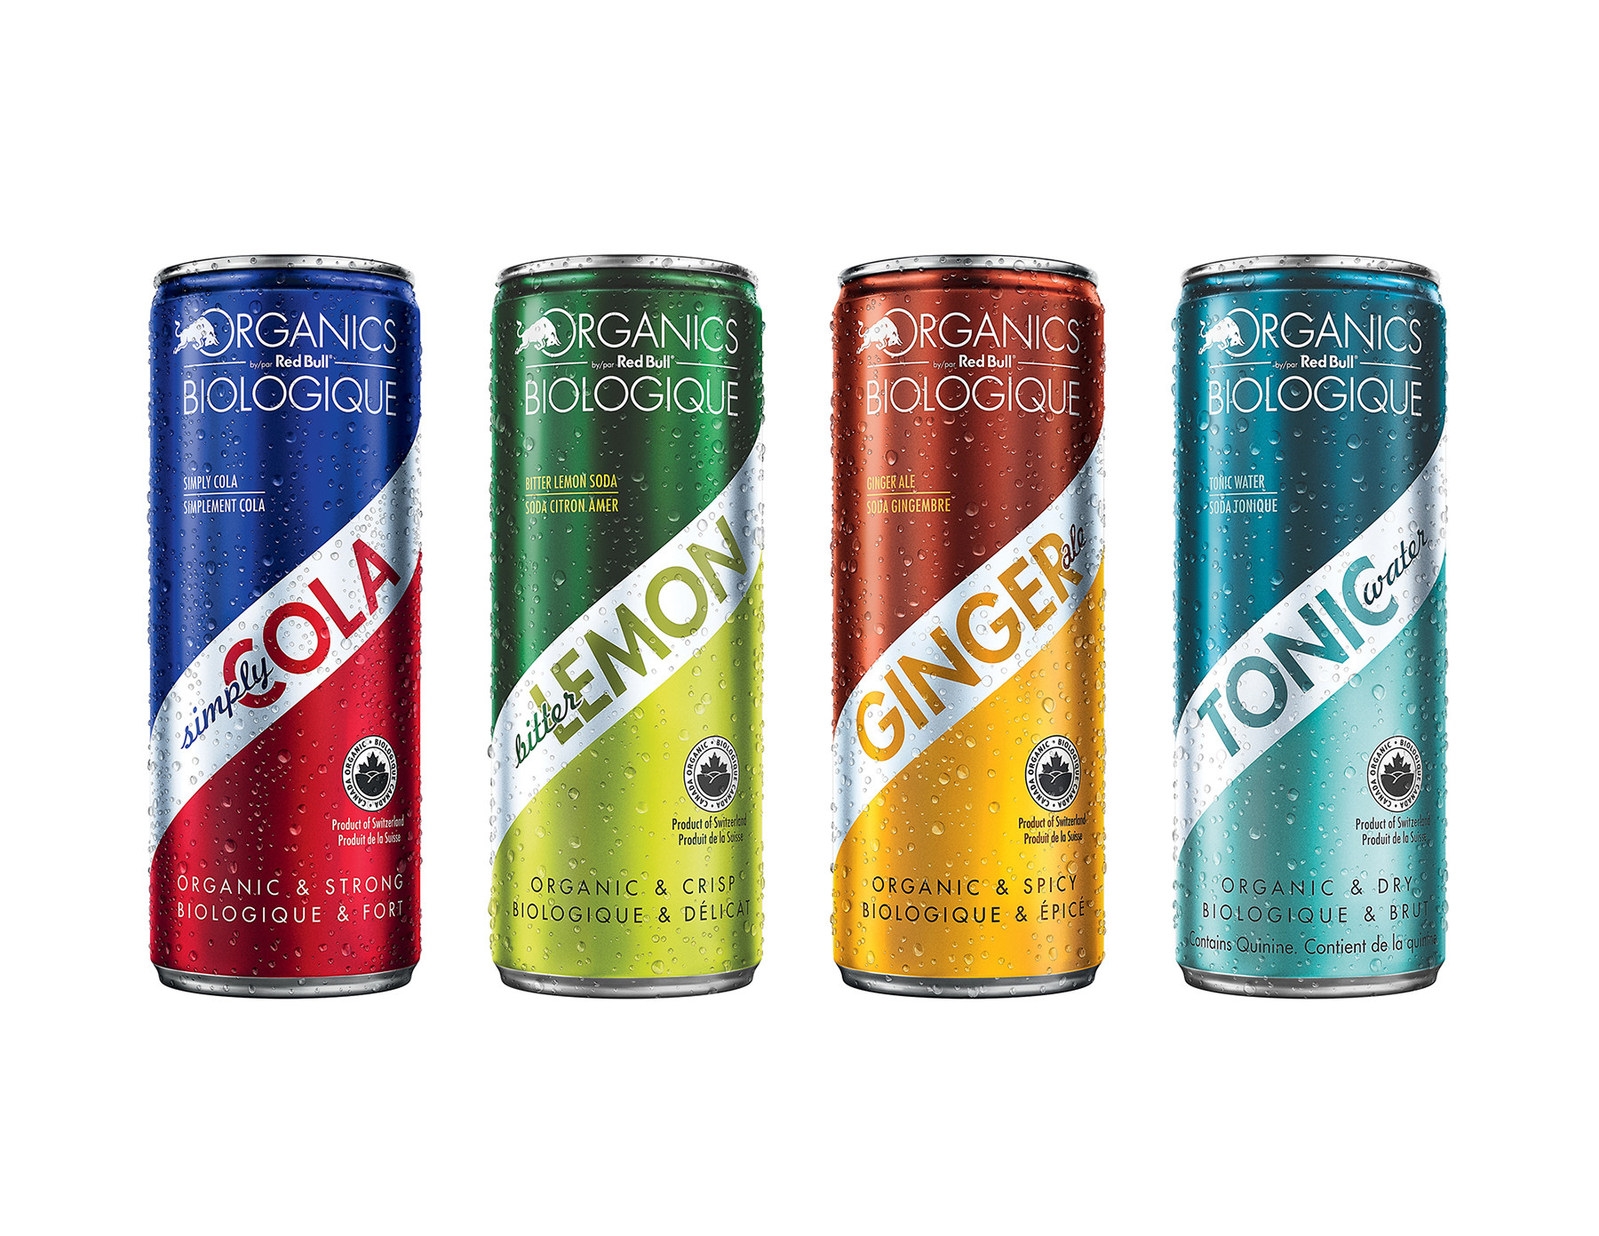 Red Bull launches line of organic sodas, most of it not caffeinated